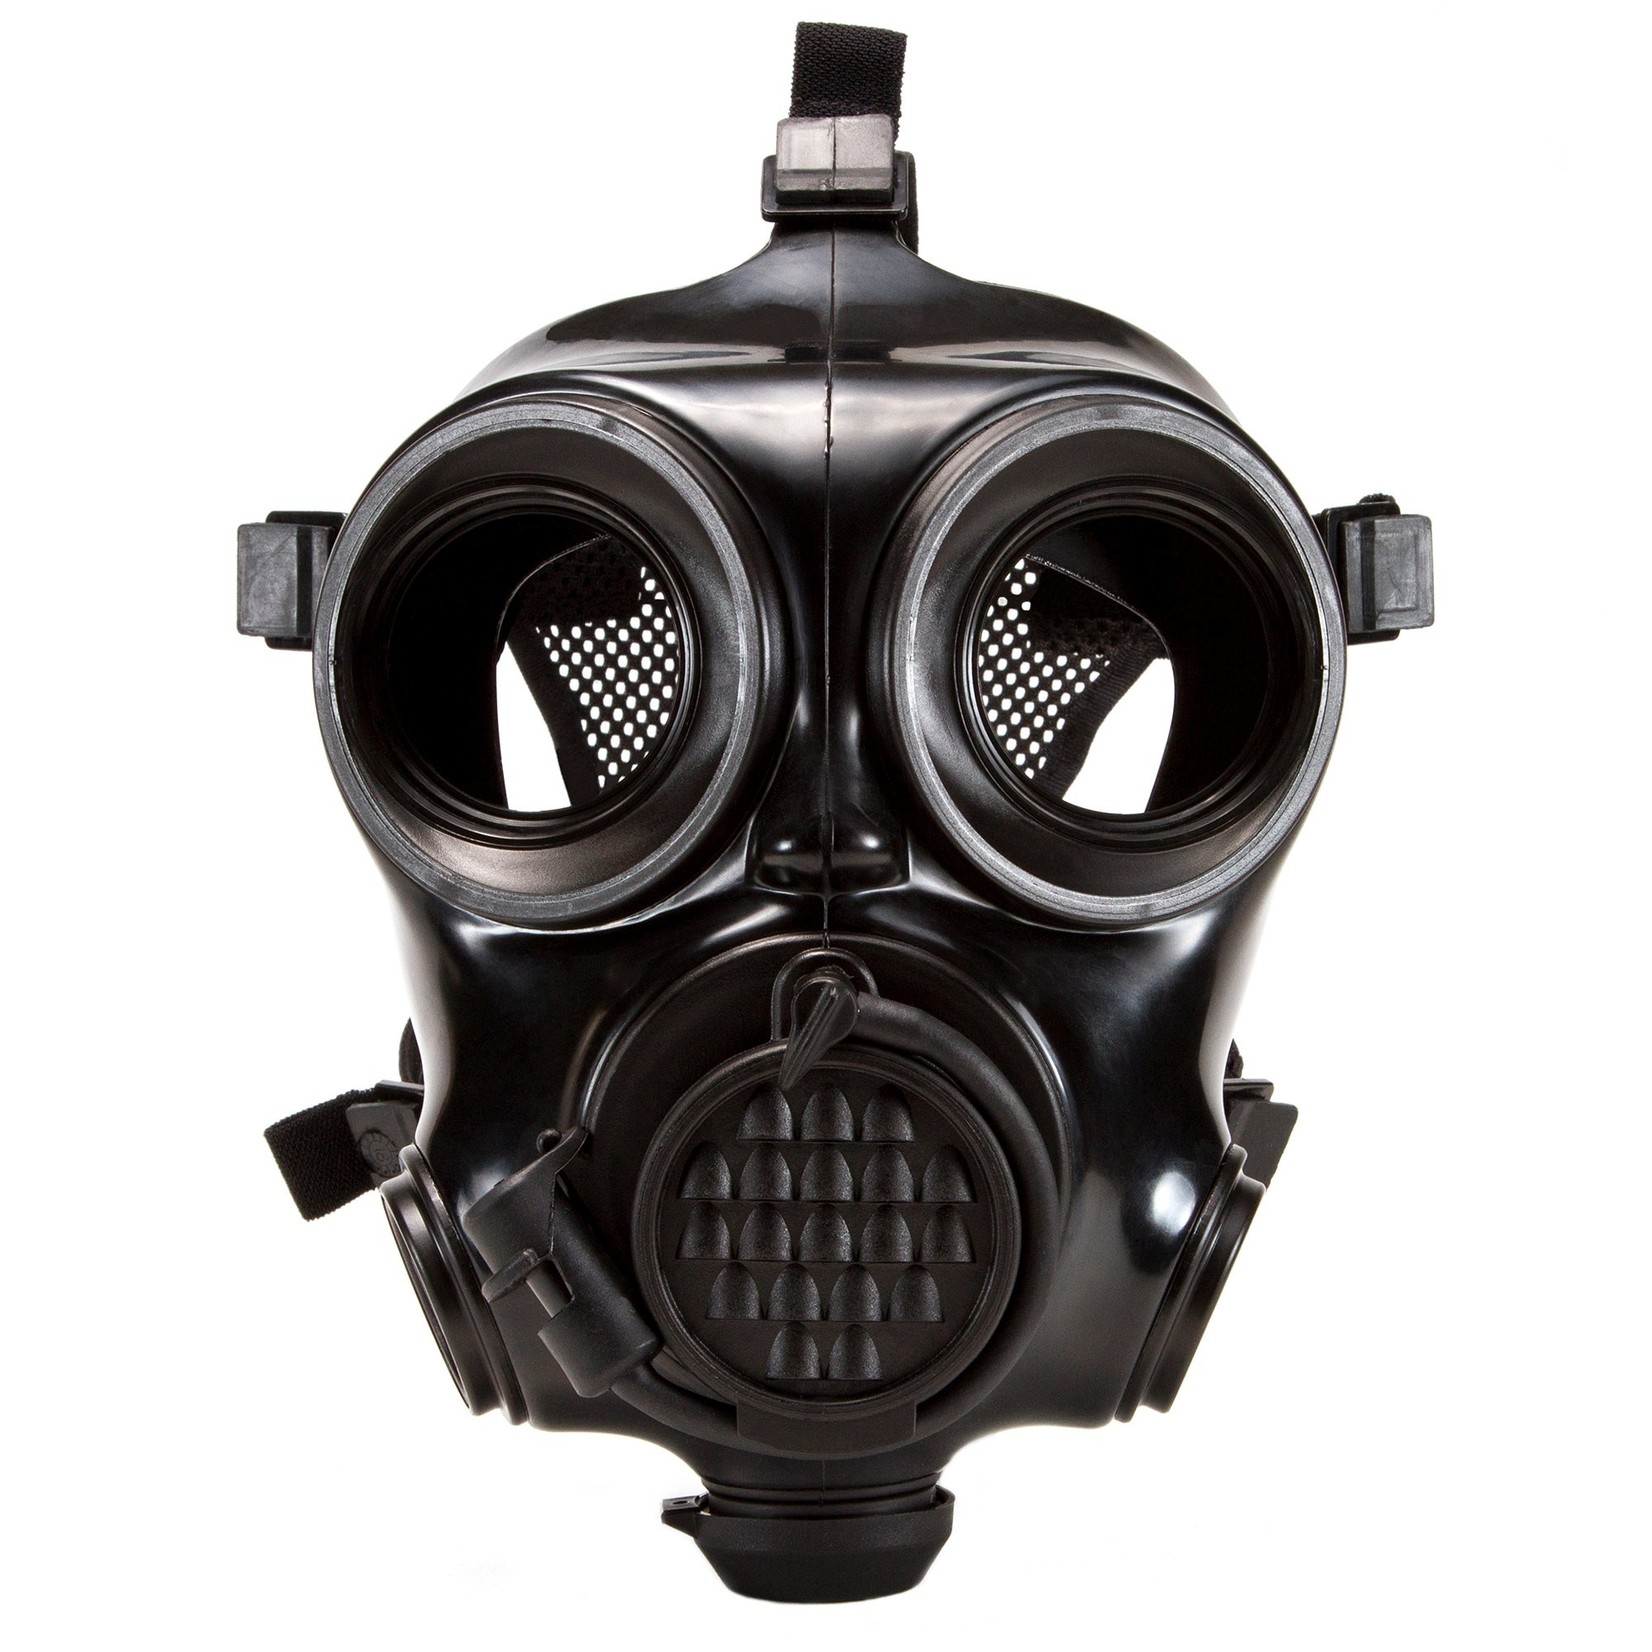 Mira Safety Cm 7m Military Gas Mask Cbrn Protection Sdtac 0030